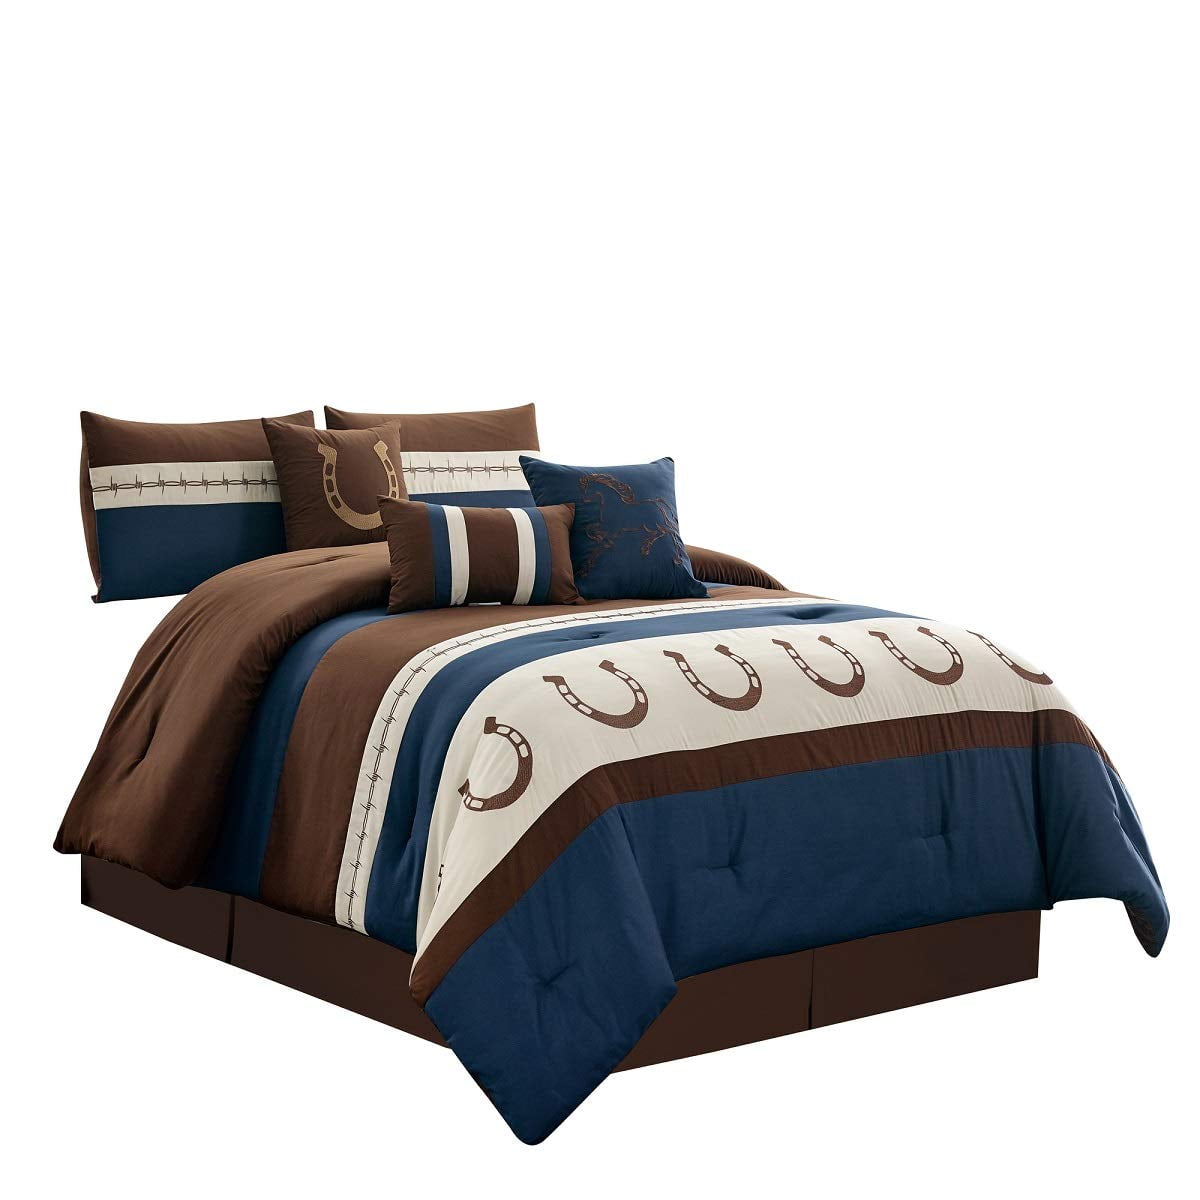 WPM WORLD PRODUCTS MART 7 Piece Western Southwestern Native American Design Comforter Set Multicolor Coffee Brown Embroidered Size Bed in a Bag Navajo Bedding Set Navy Blue, King Makala 